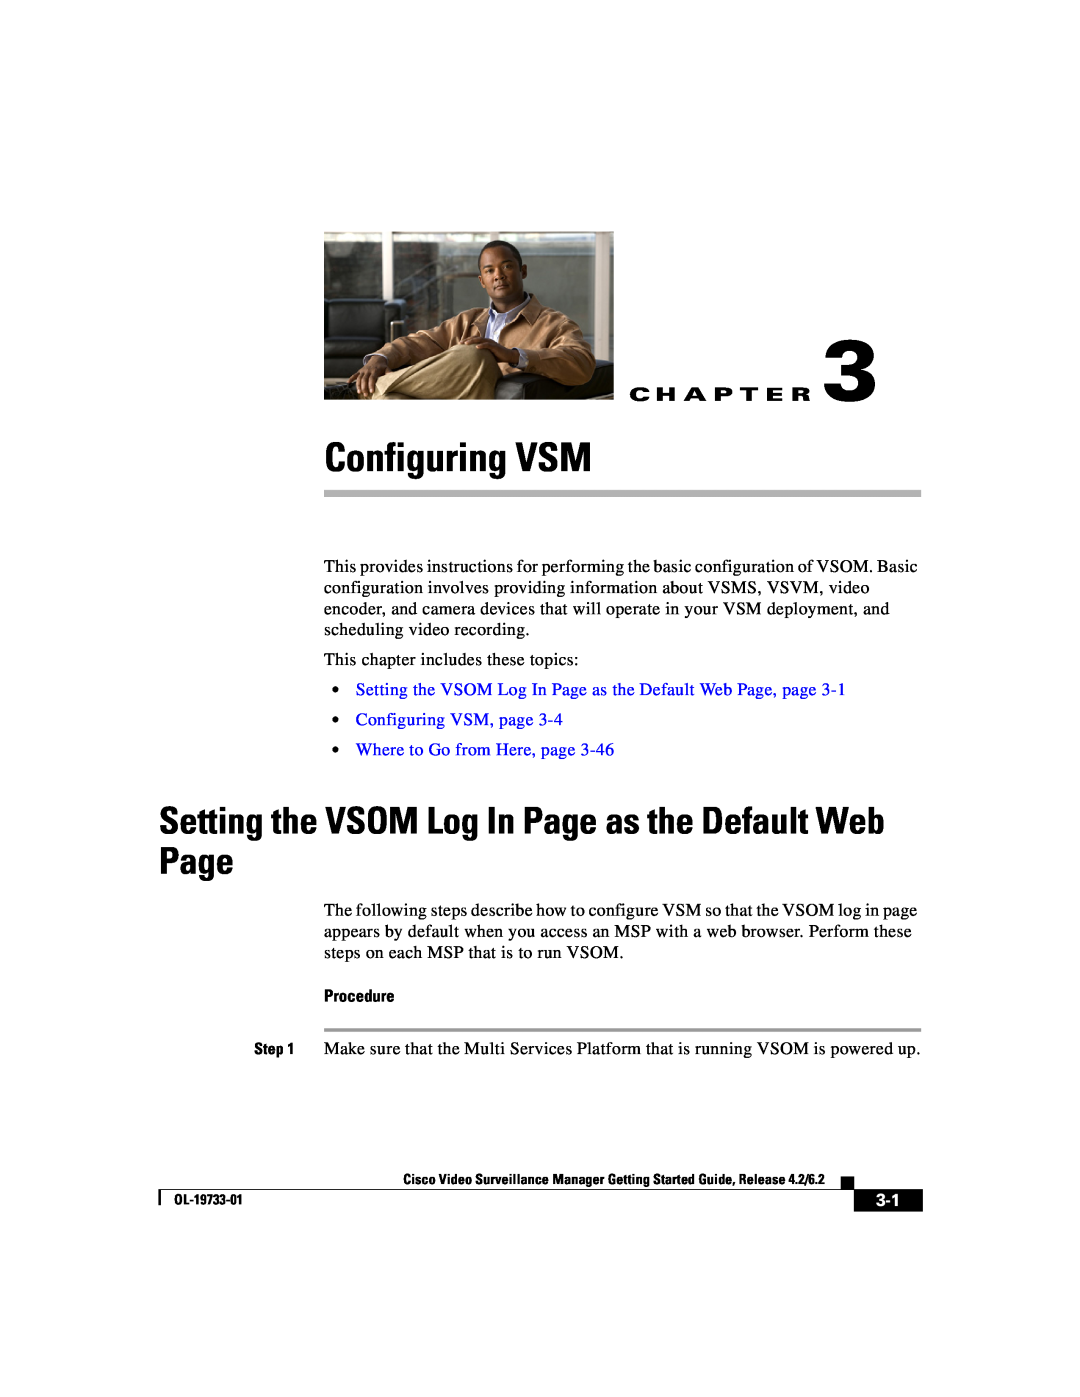 Cisco Systems Release 4.2 Configuring VSM, Setting the VSOM Log In Page as the Default Web Page, C H A P T E R, Procedure 